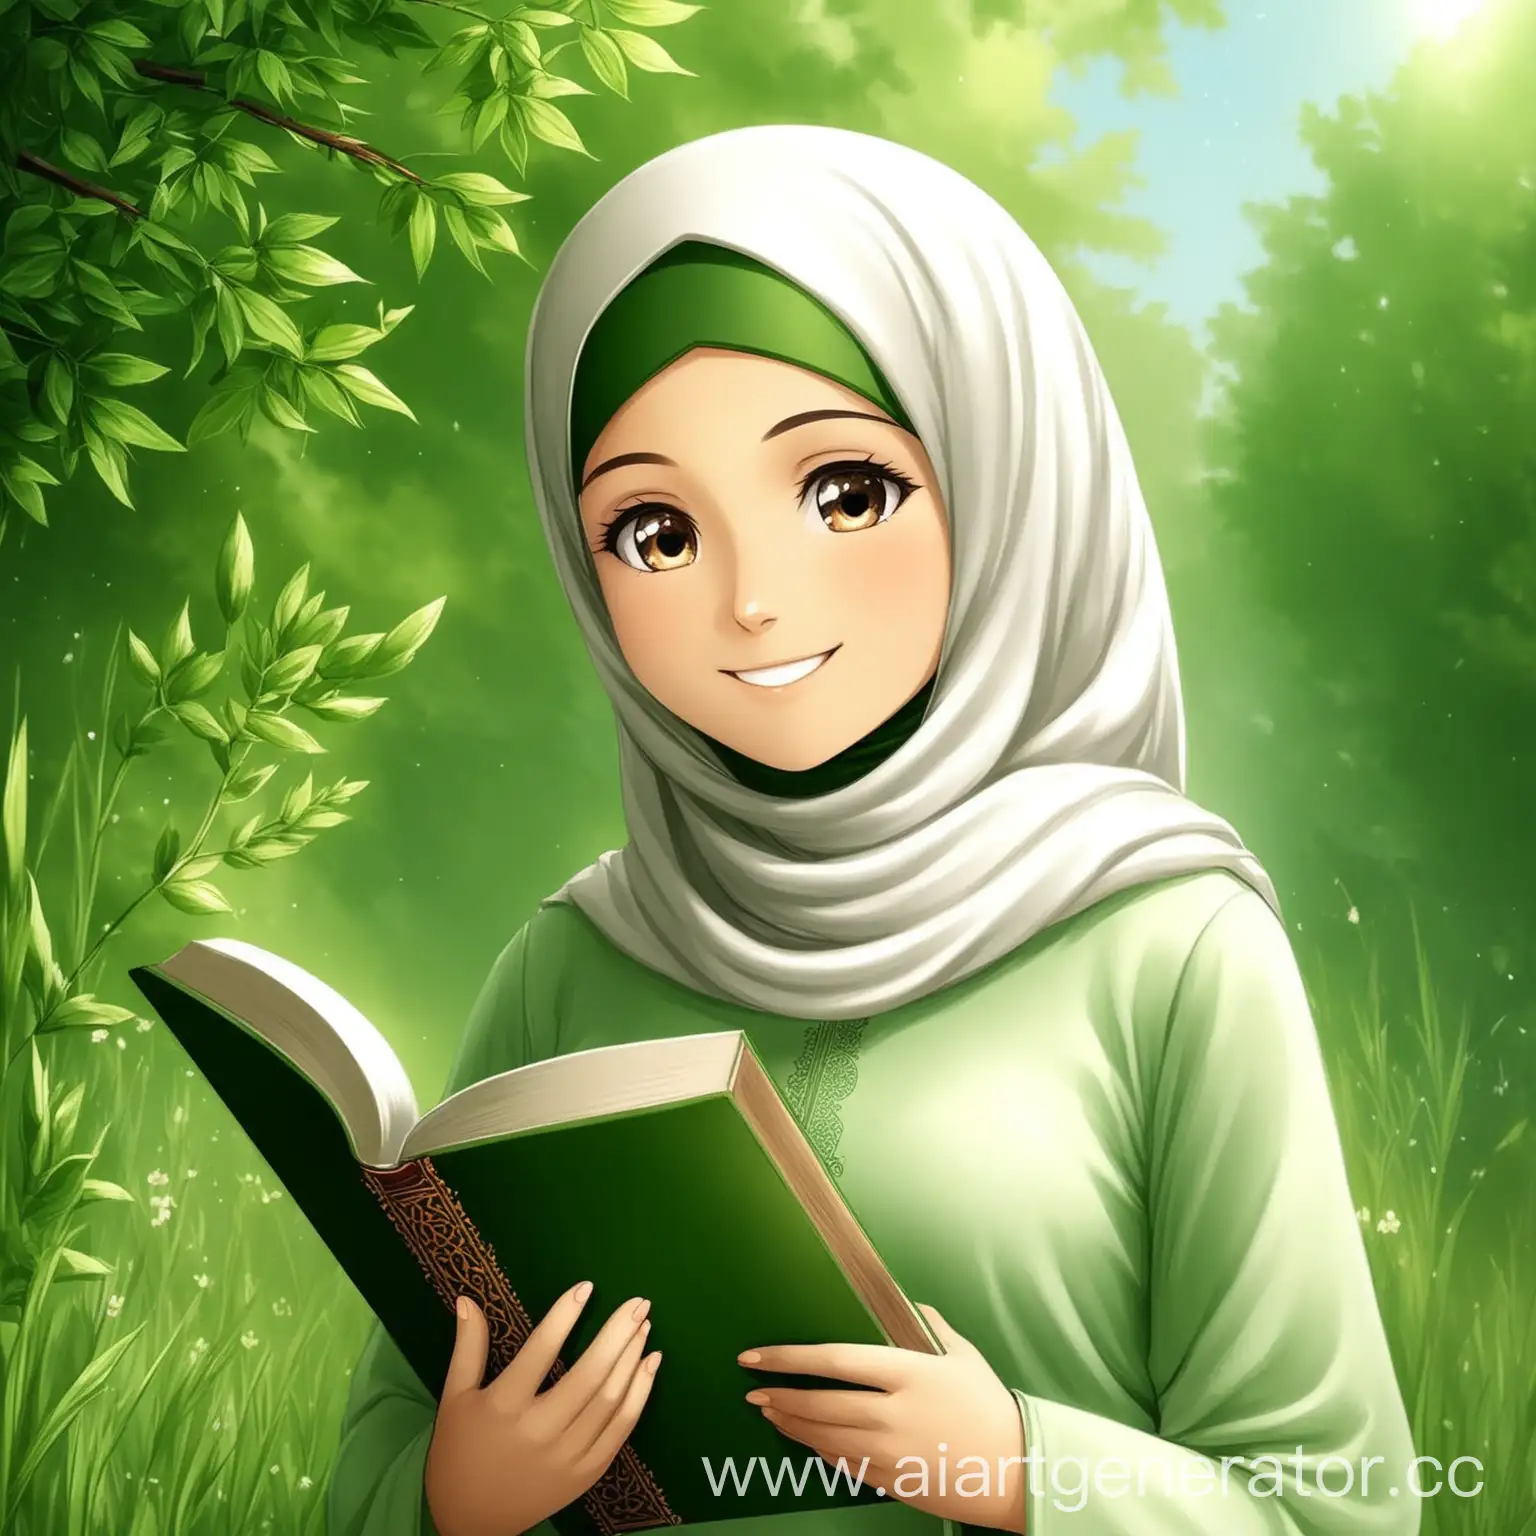 The girl in Islam looks at nature and smiles, holding a book.